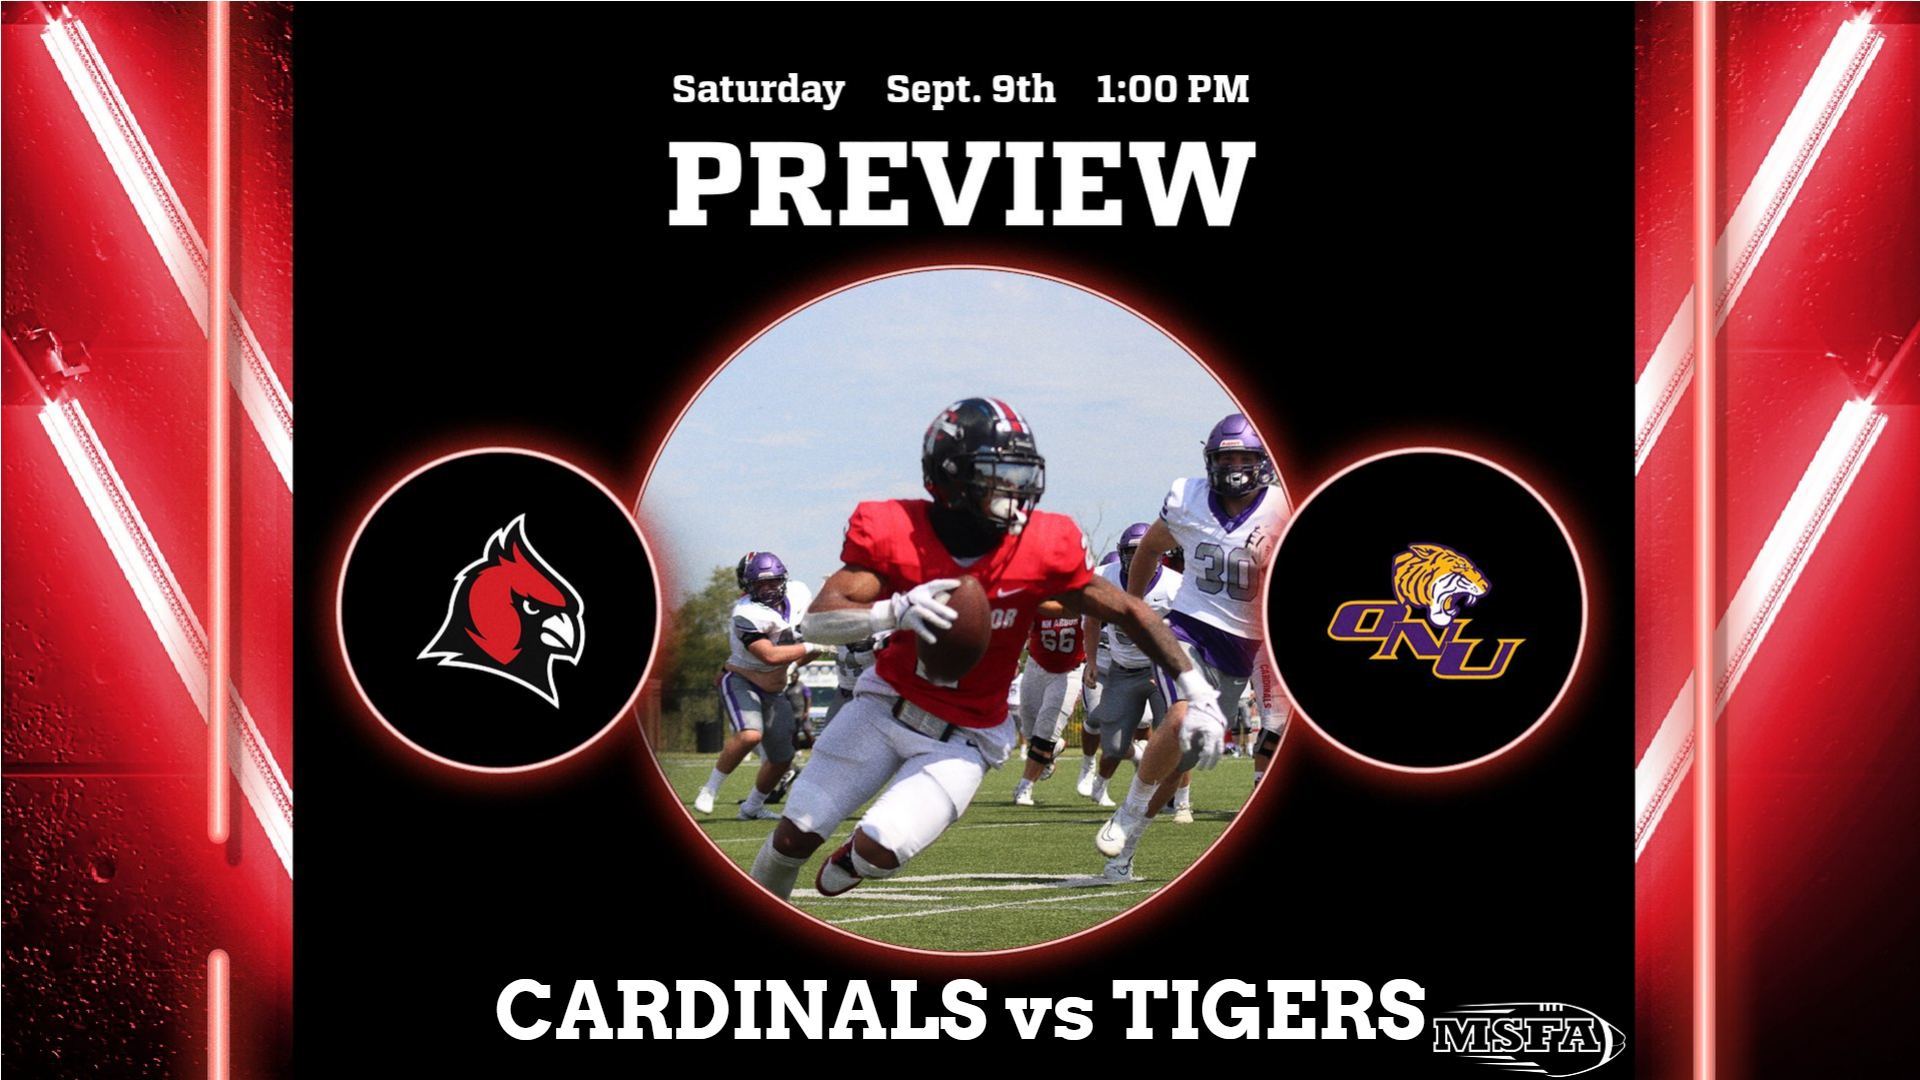 WEEK 2 GAME NOTES: Cardinals and Tigers both look to stay unbeaten this weekend